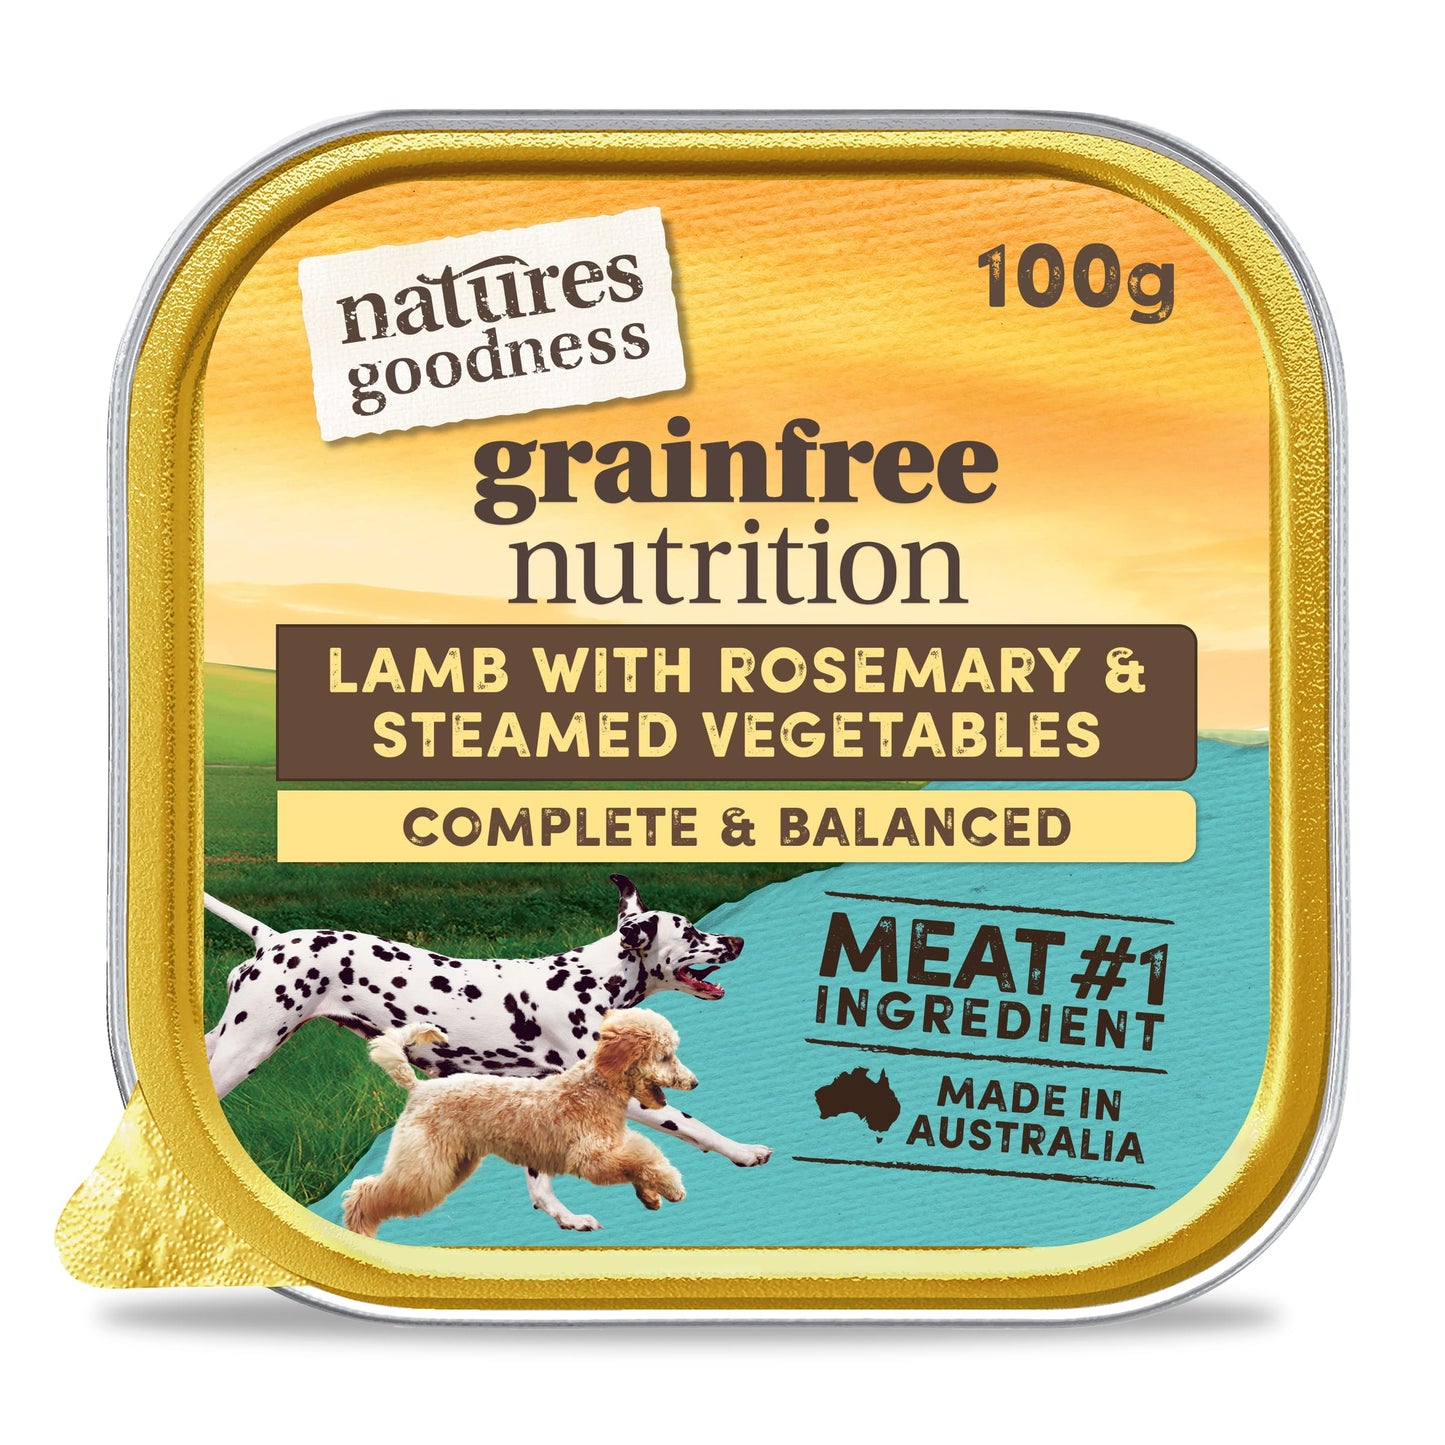 Natures Goodness Grain Free Dog Loaf Lamb with Rosemary and Steamed Vegetables 100g x 9